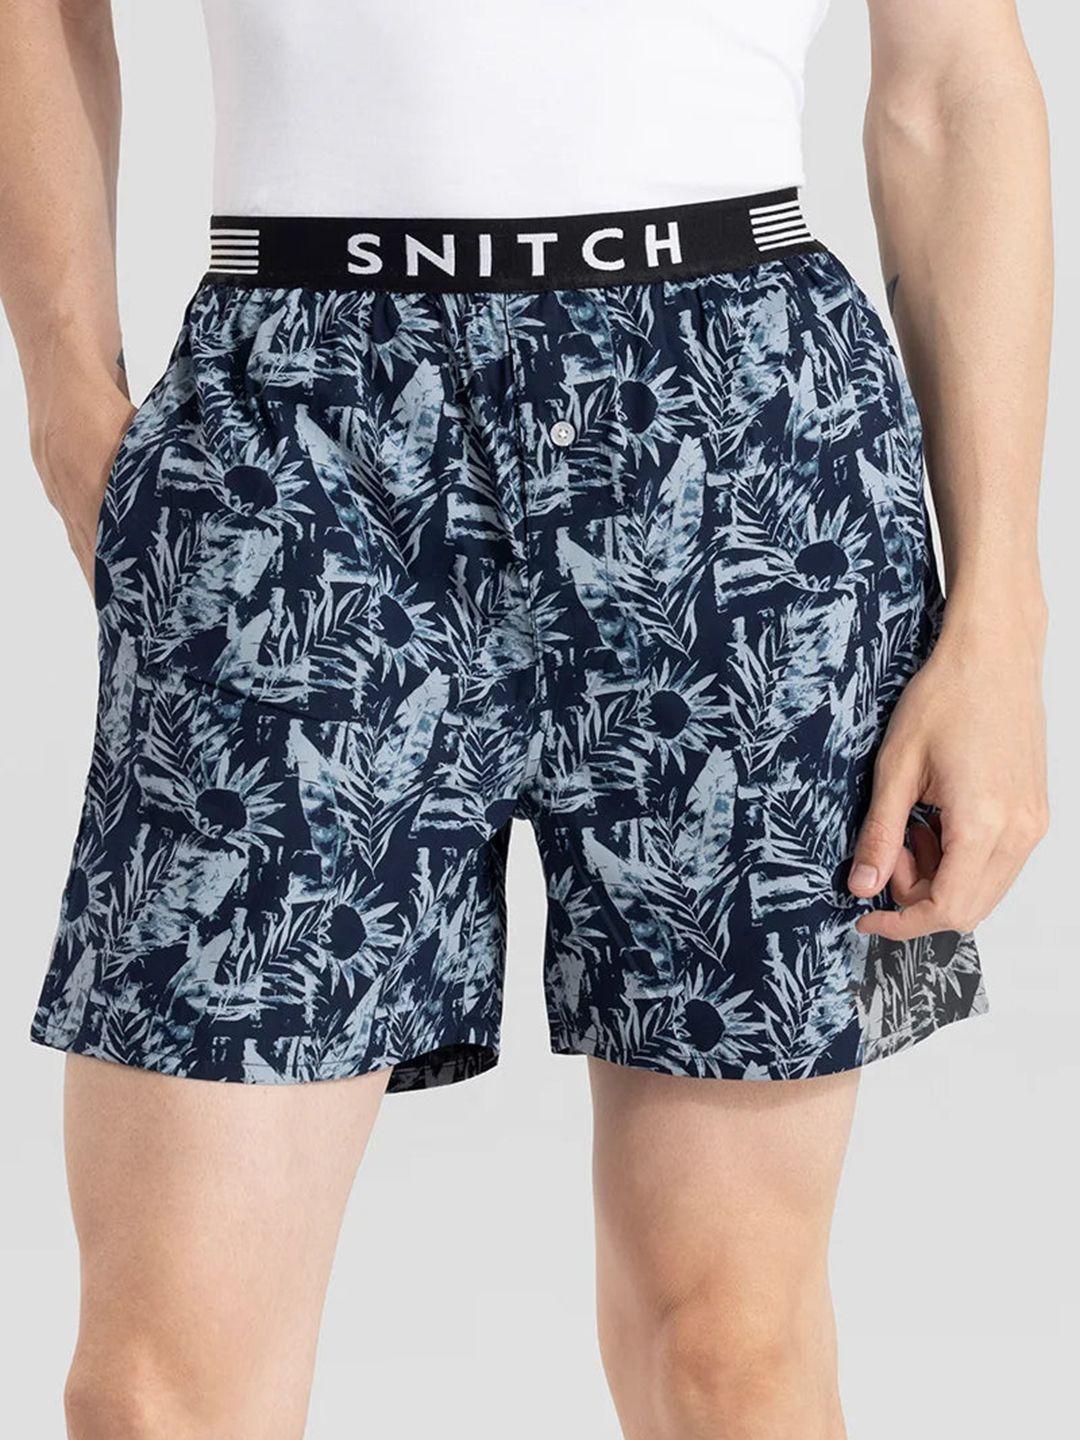 snitch blue & grey printed cotton outer elastic boxers 4msbx9217-06-s